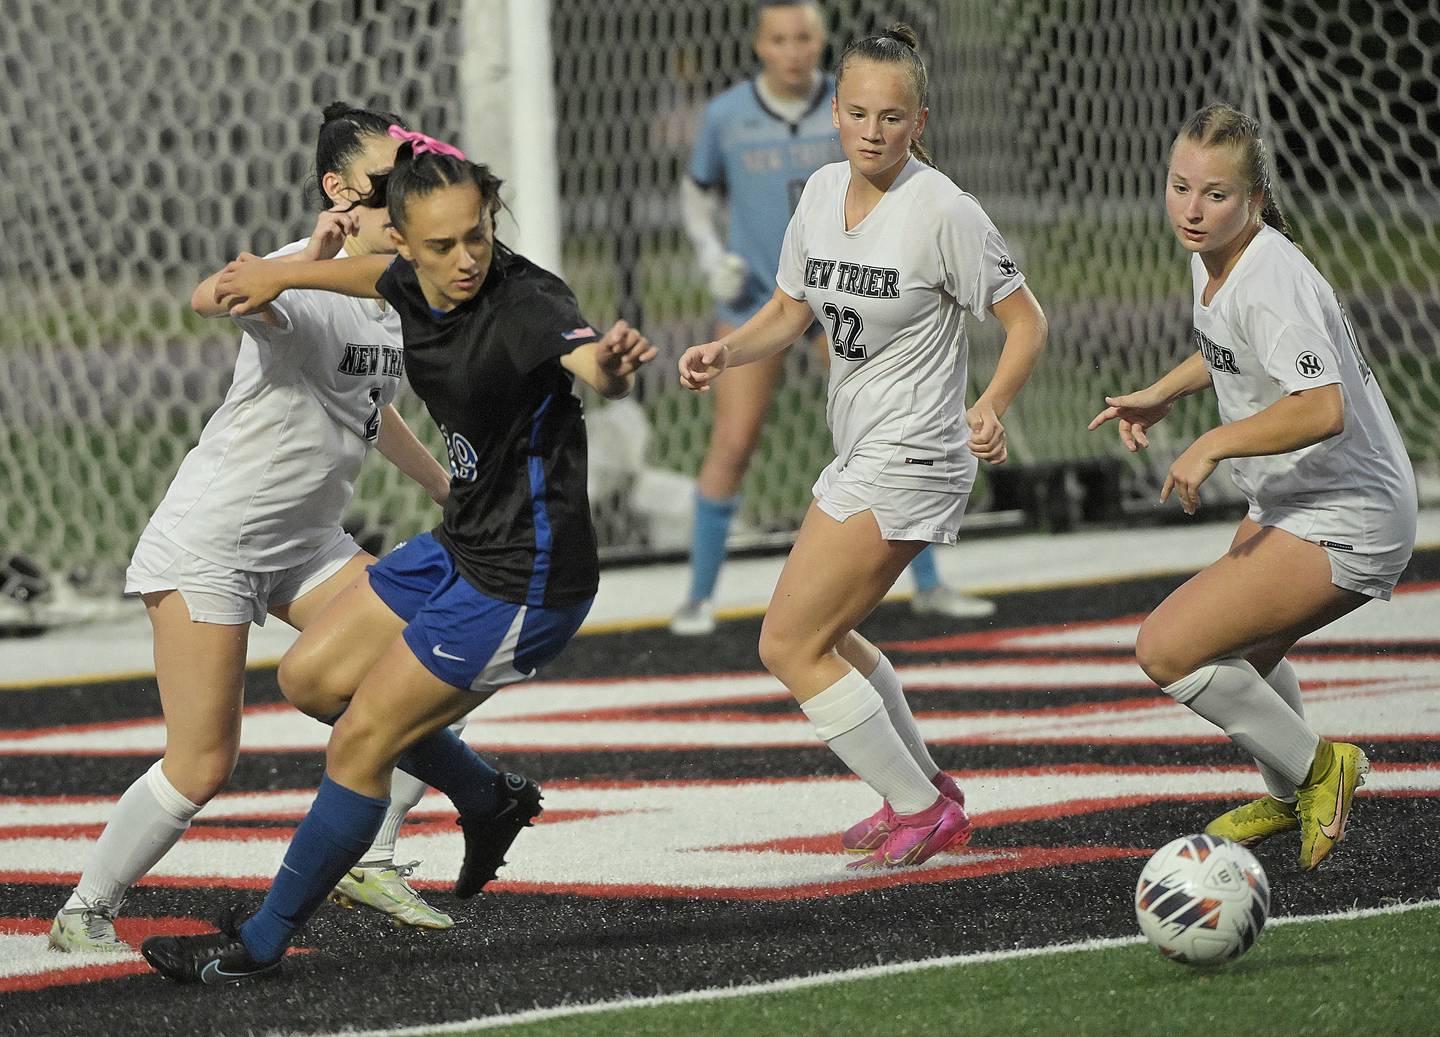 St. Charles North High School’s Laney Stark tracks down the ball before scoring her first goal of the game against Winnetka New Trier High School in the IHSA Class 3A championship game at North Central College in Naperville on Saturday, June 1, 2024.